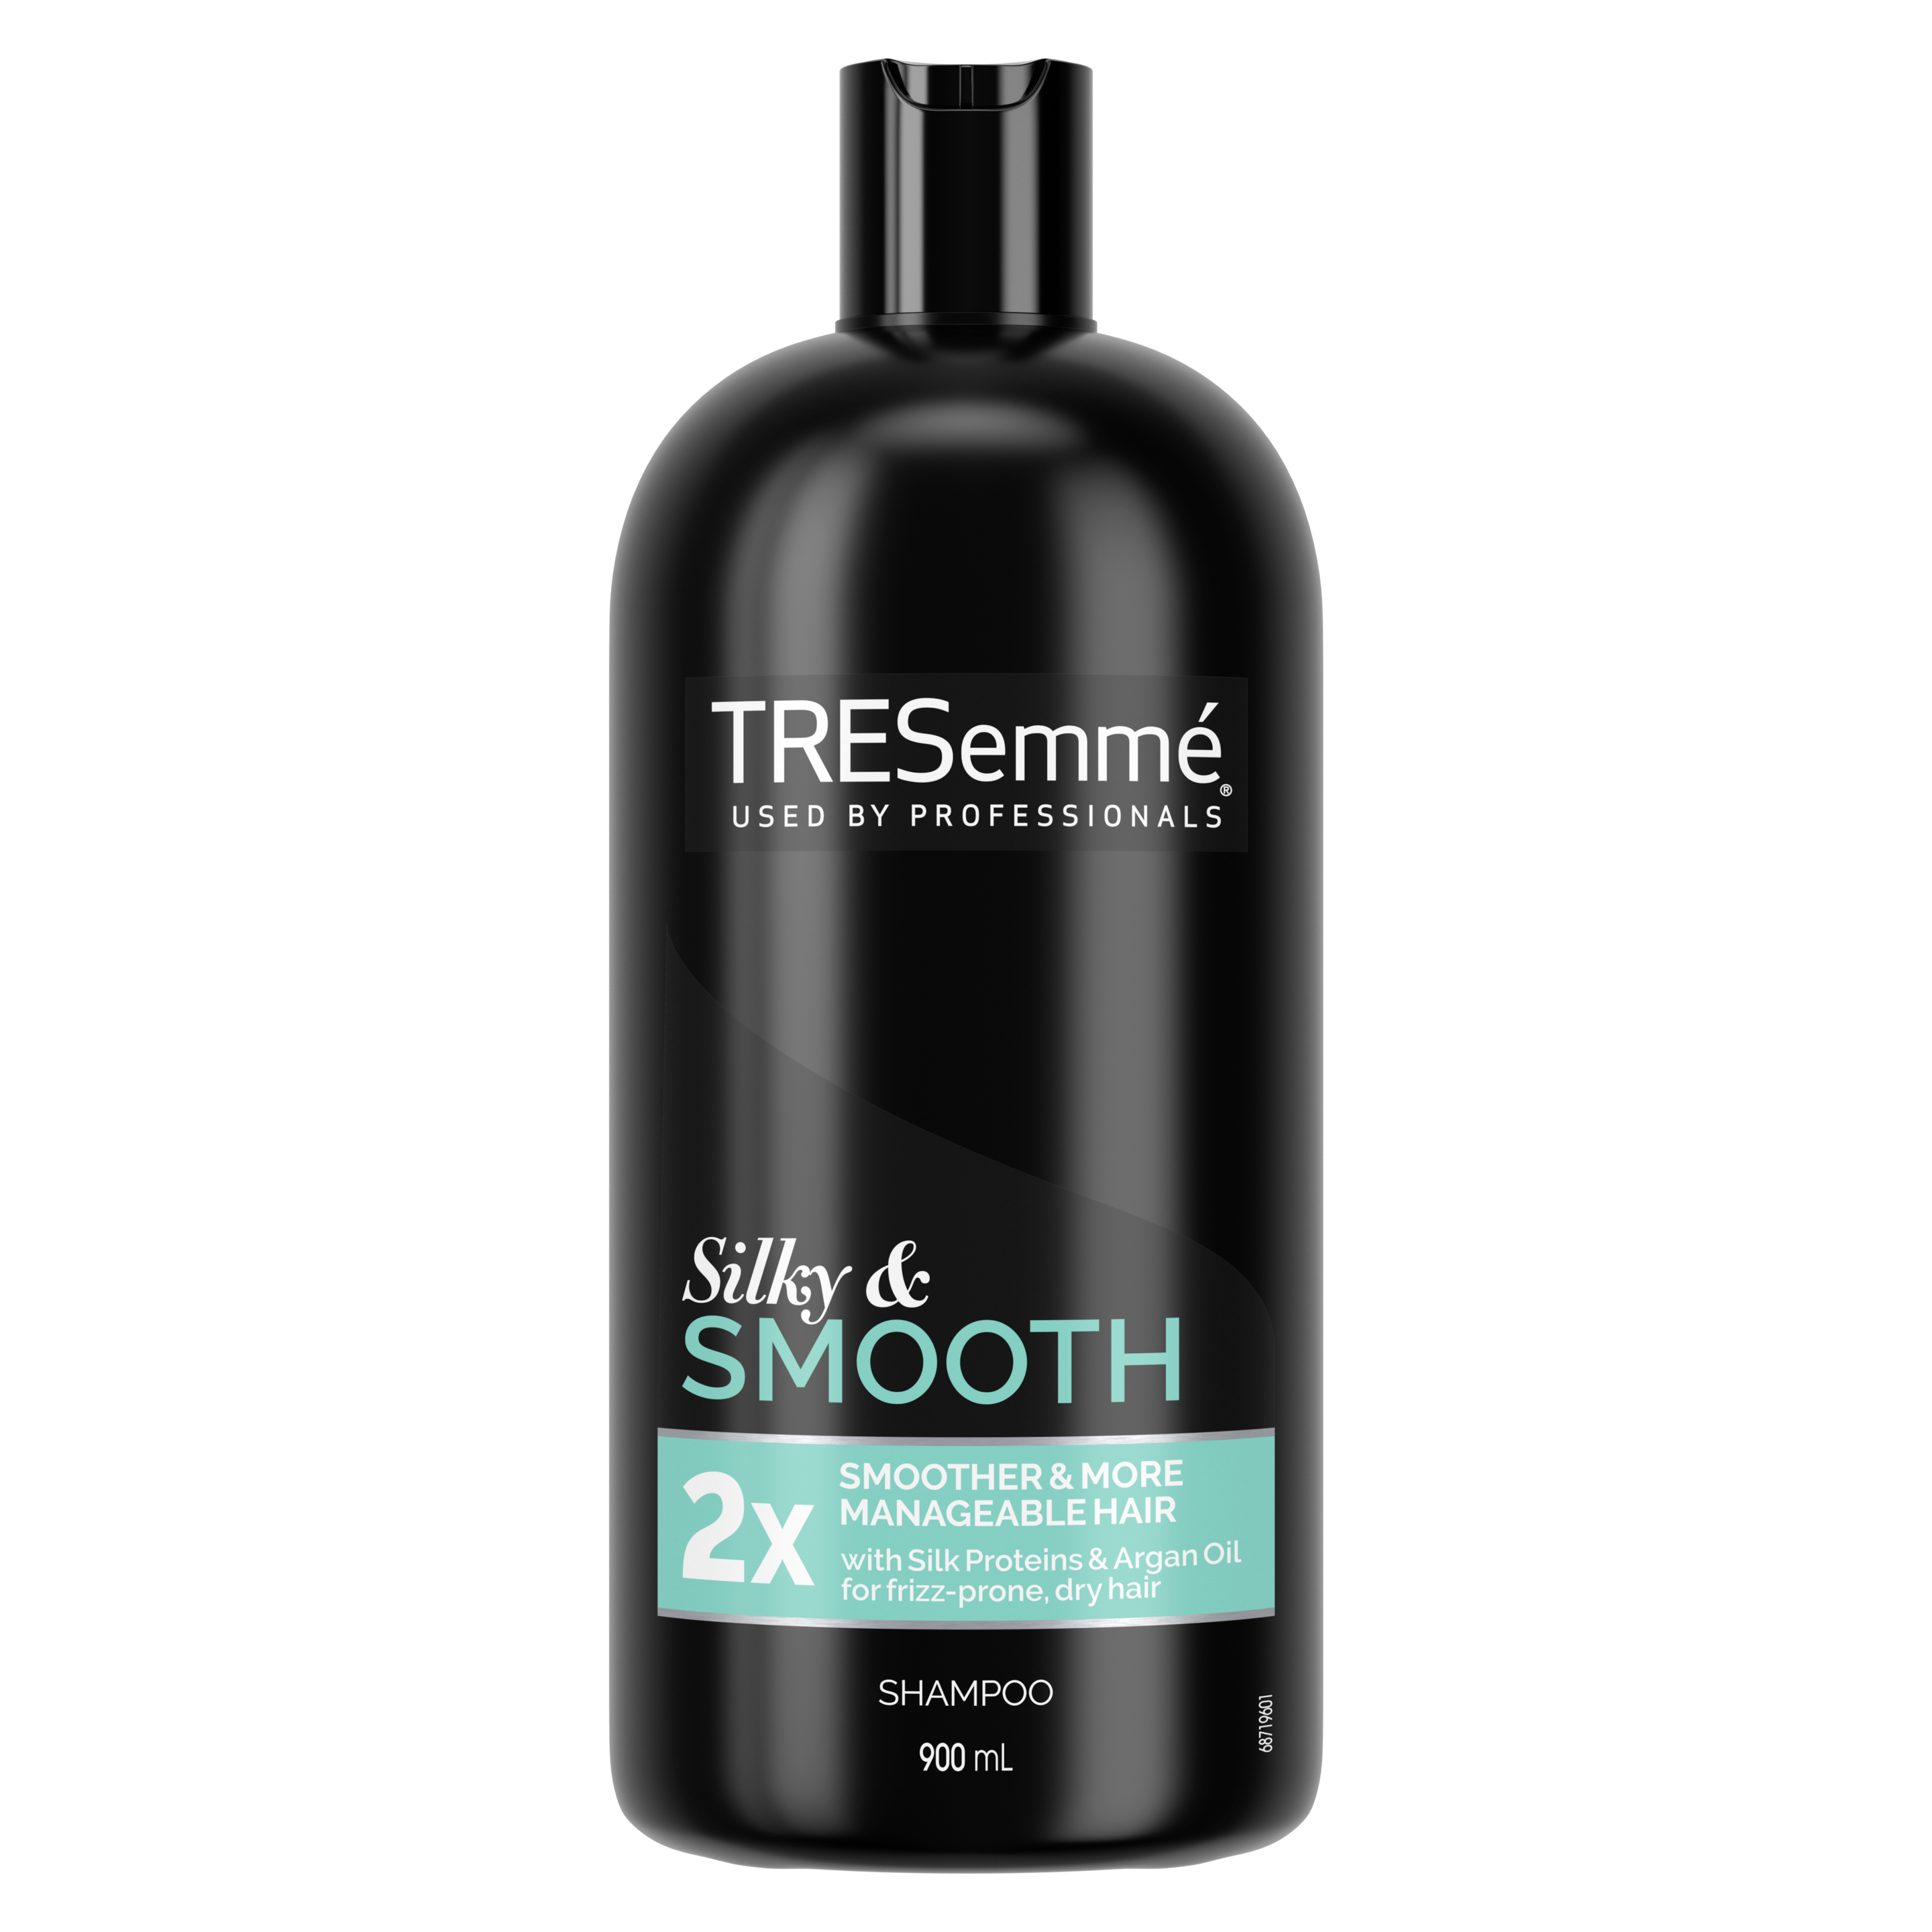 A 900ml bottle of TRESemmé Silky & Smooth Conditioner front of pack image